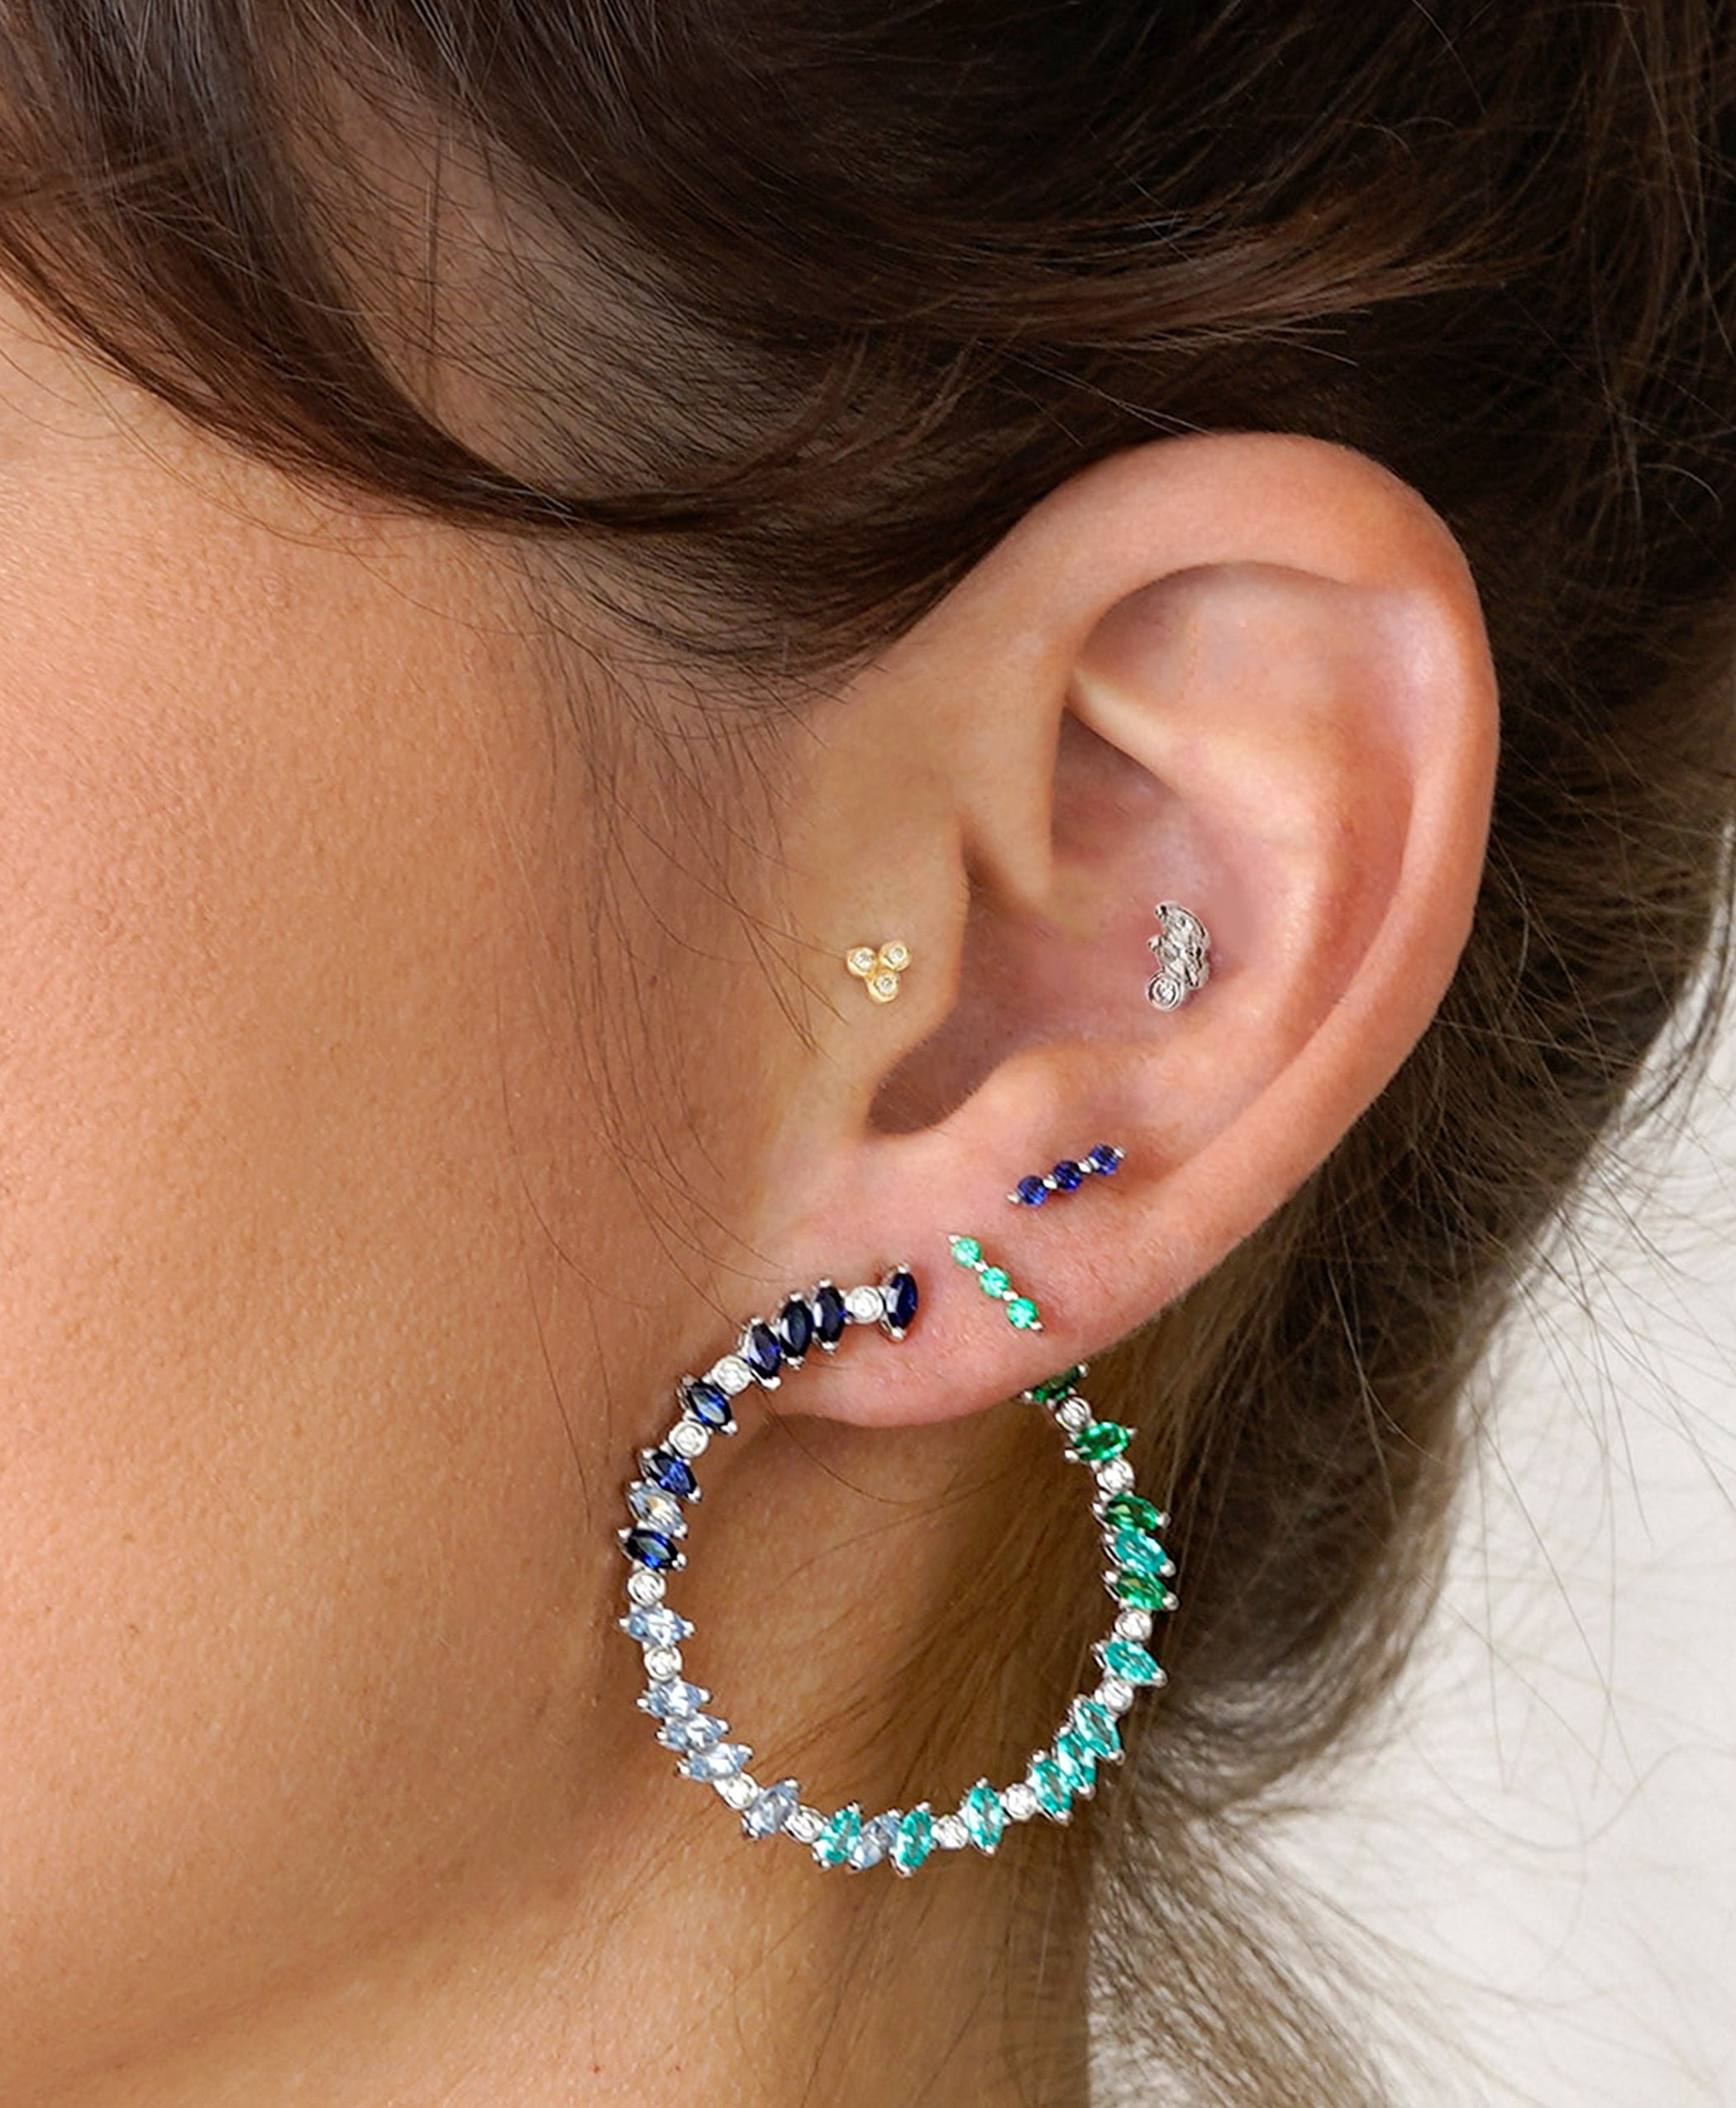 Veto Bright Sapphire, Spinel, Emerald and Diamond Hoops